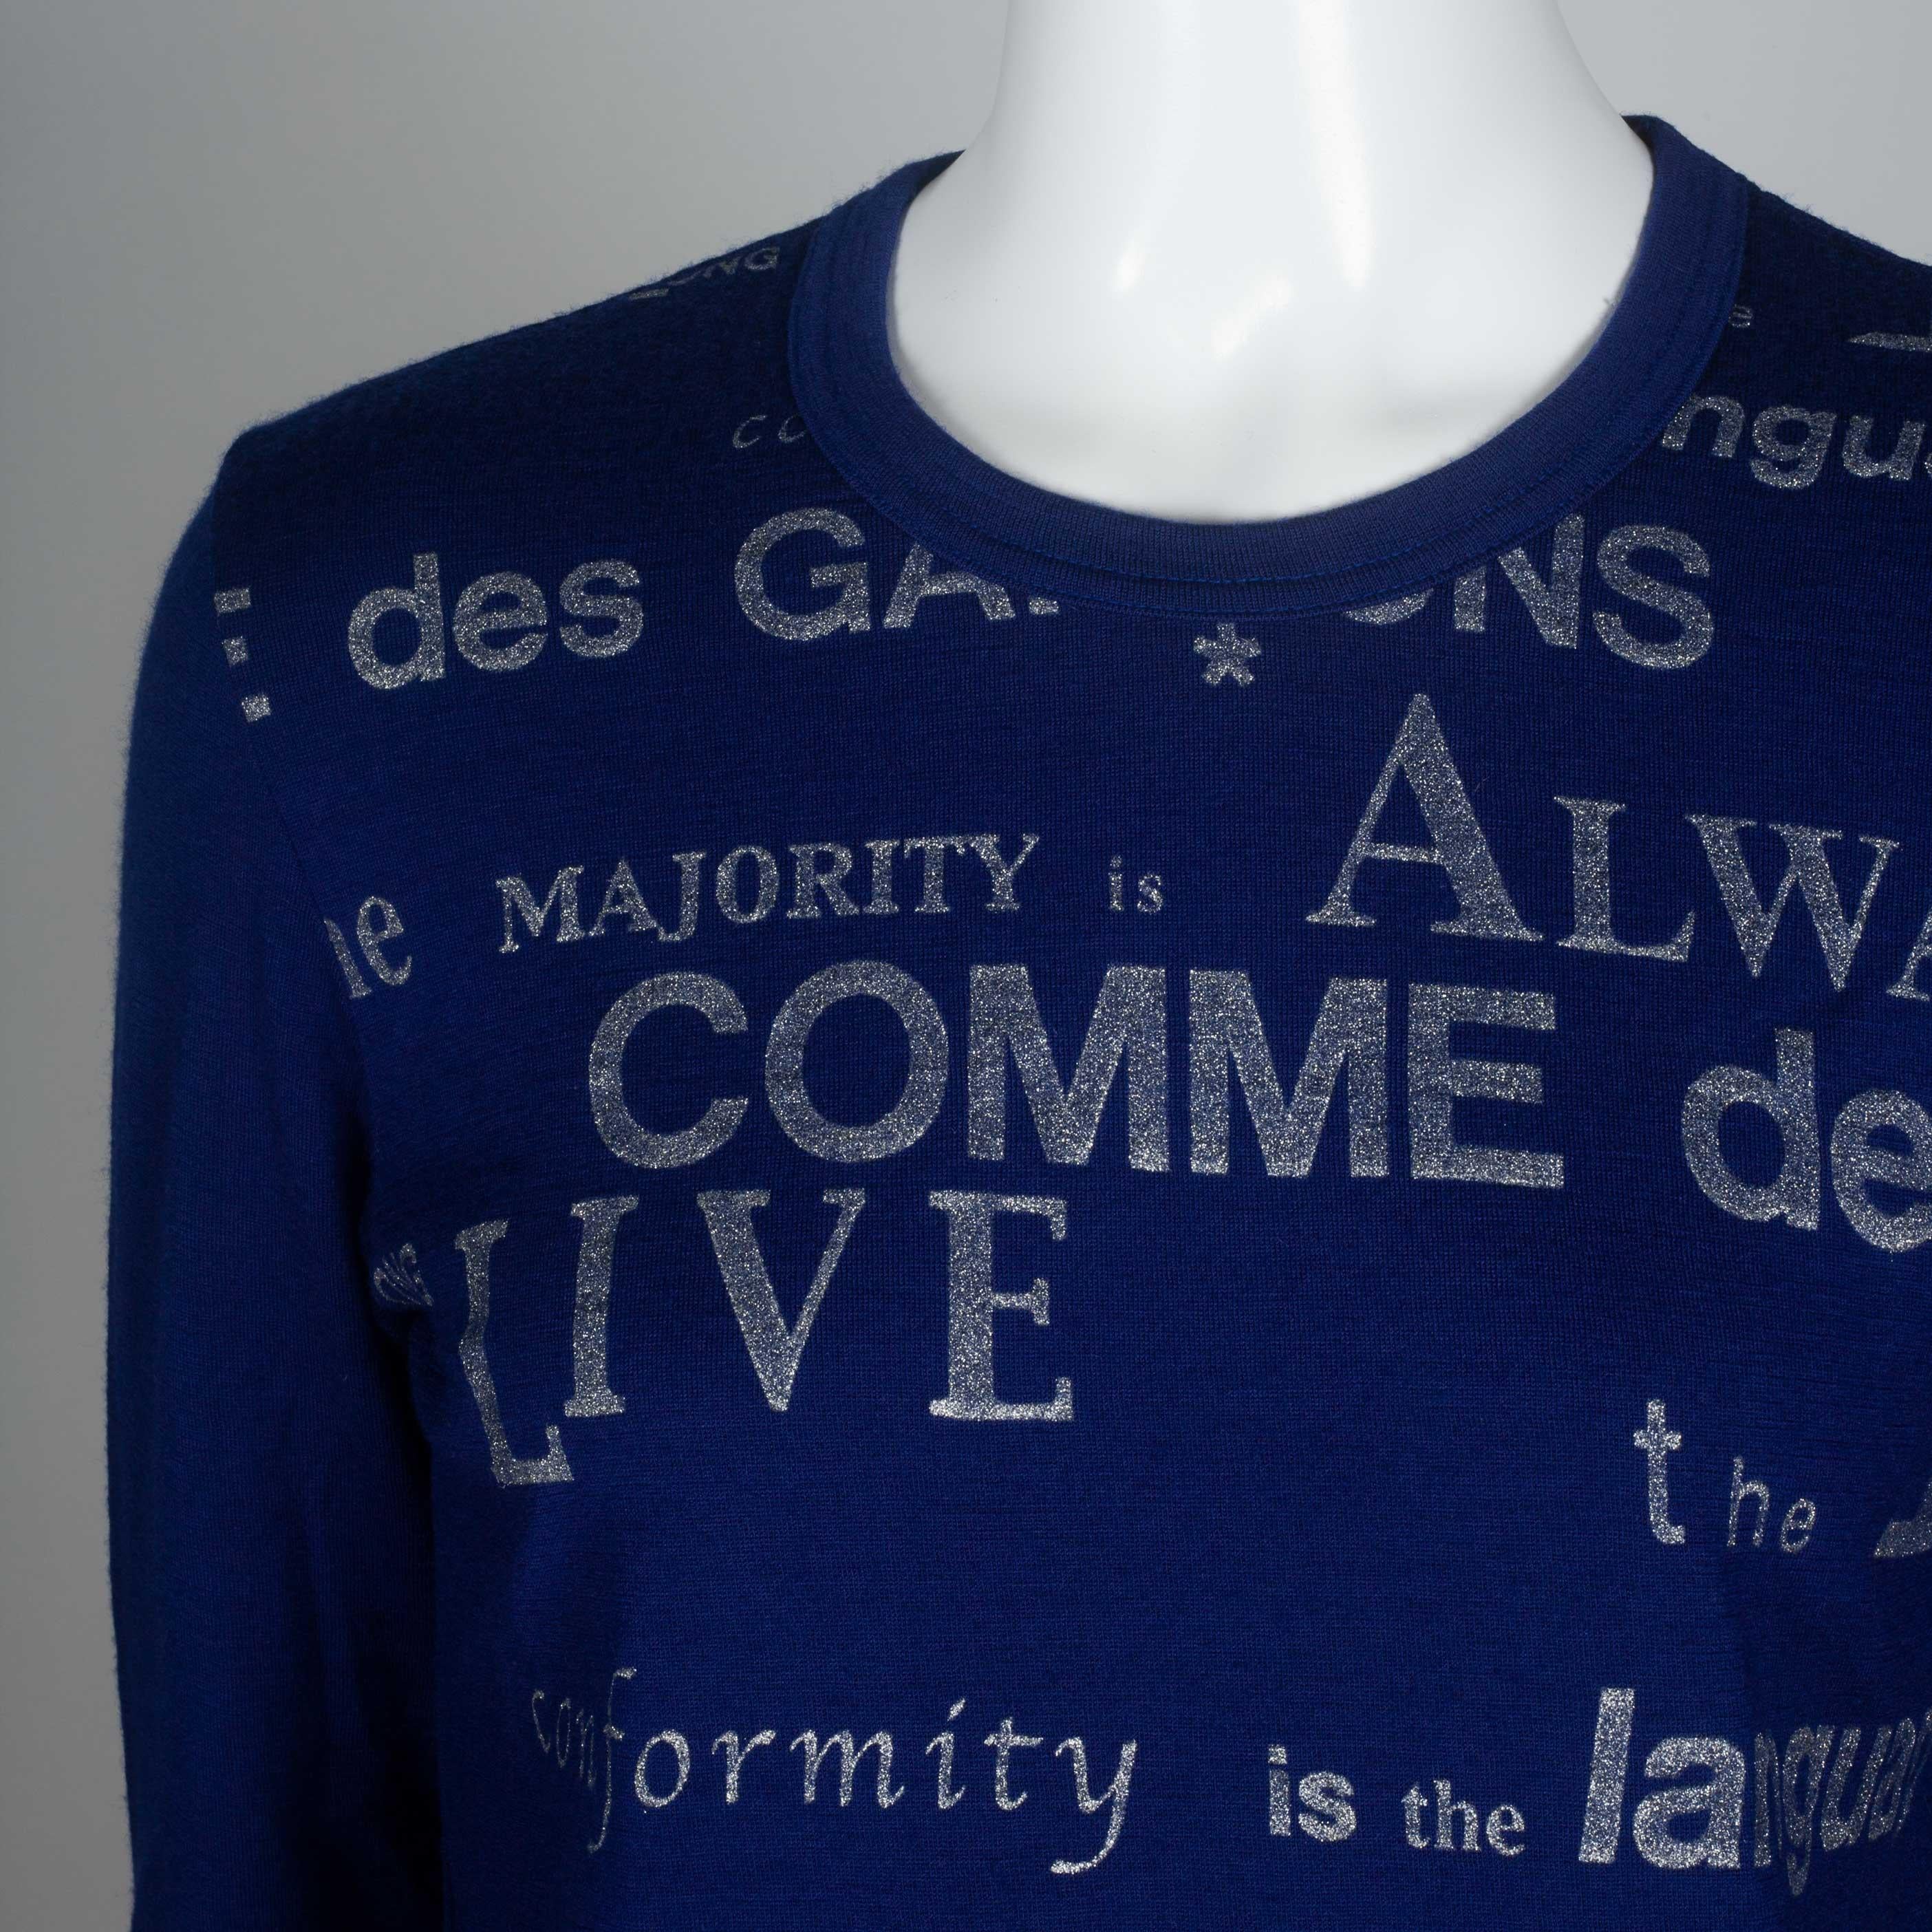 Comme des Garçons Blue Long Sleeve Shirt with Printed Words, 2003 2